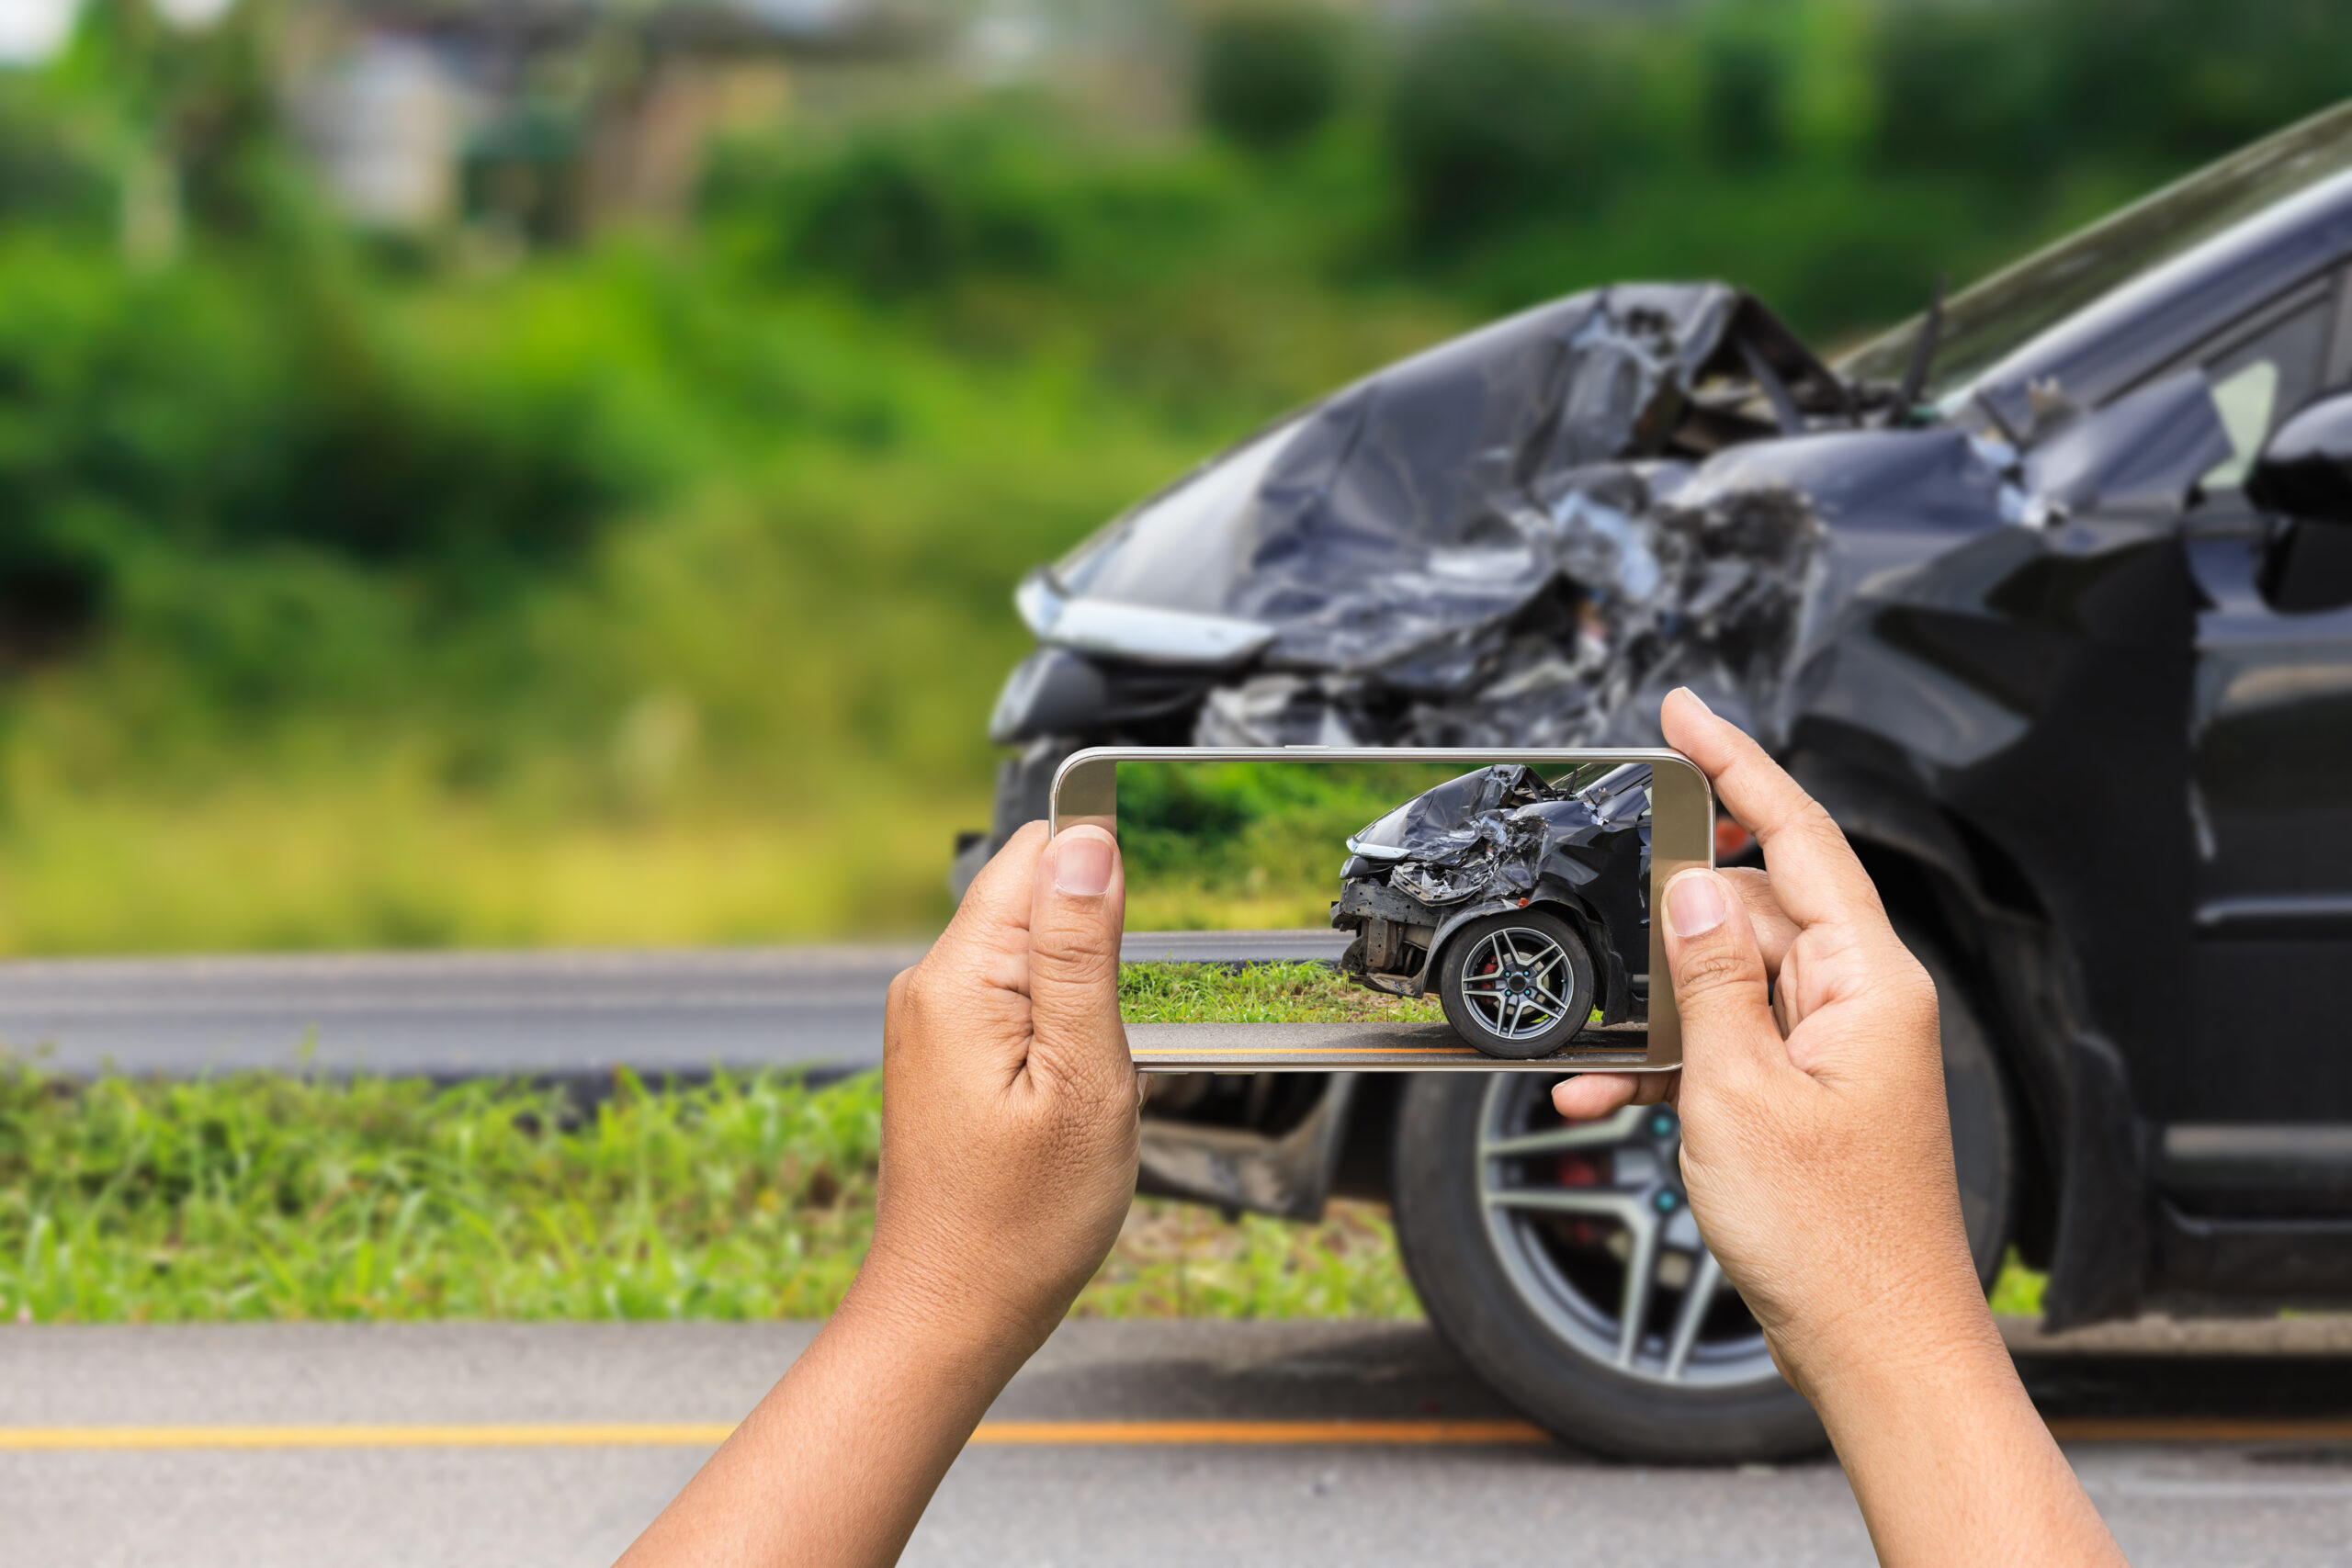 The most common causes of car accidents in Virginia